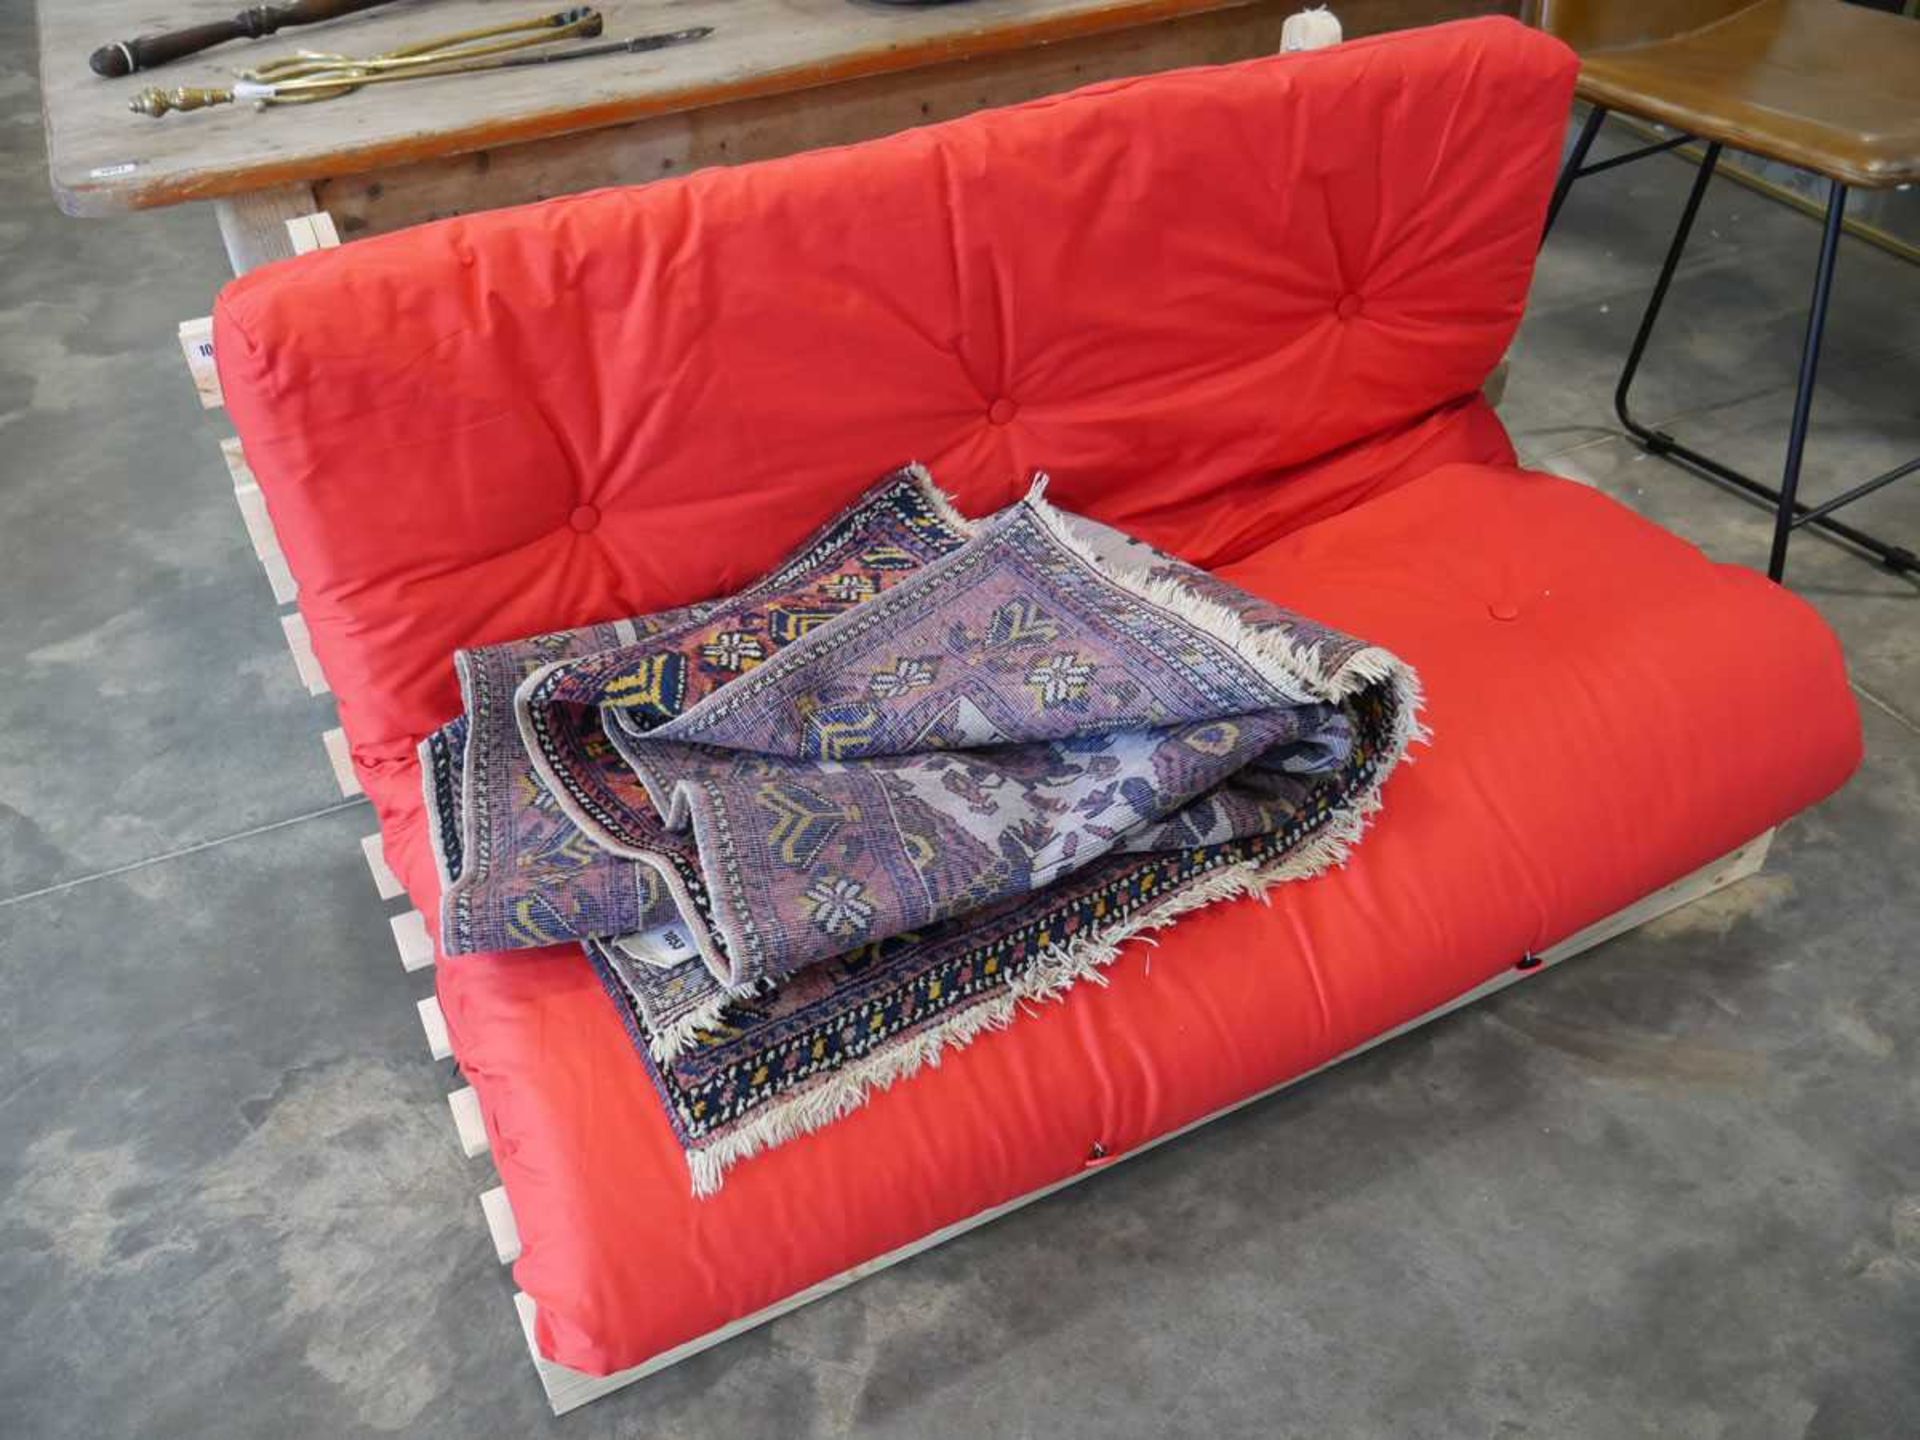 Pine framed double futon with red mattress